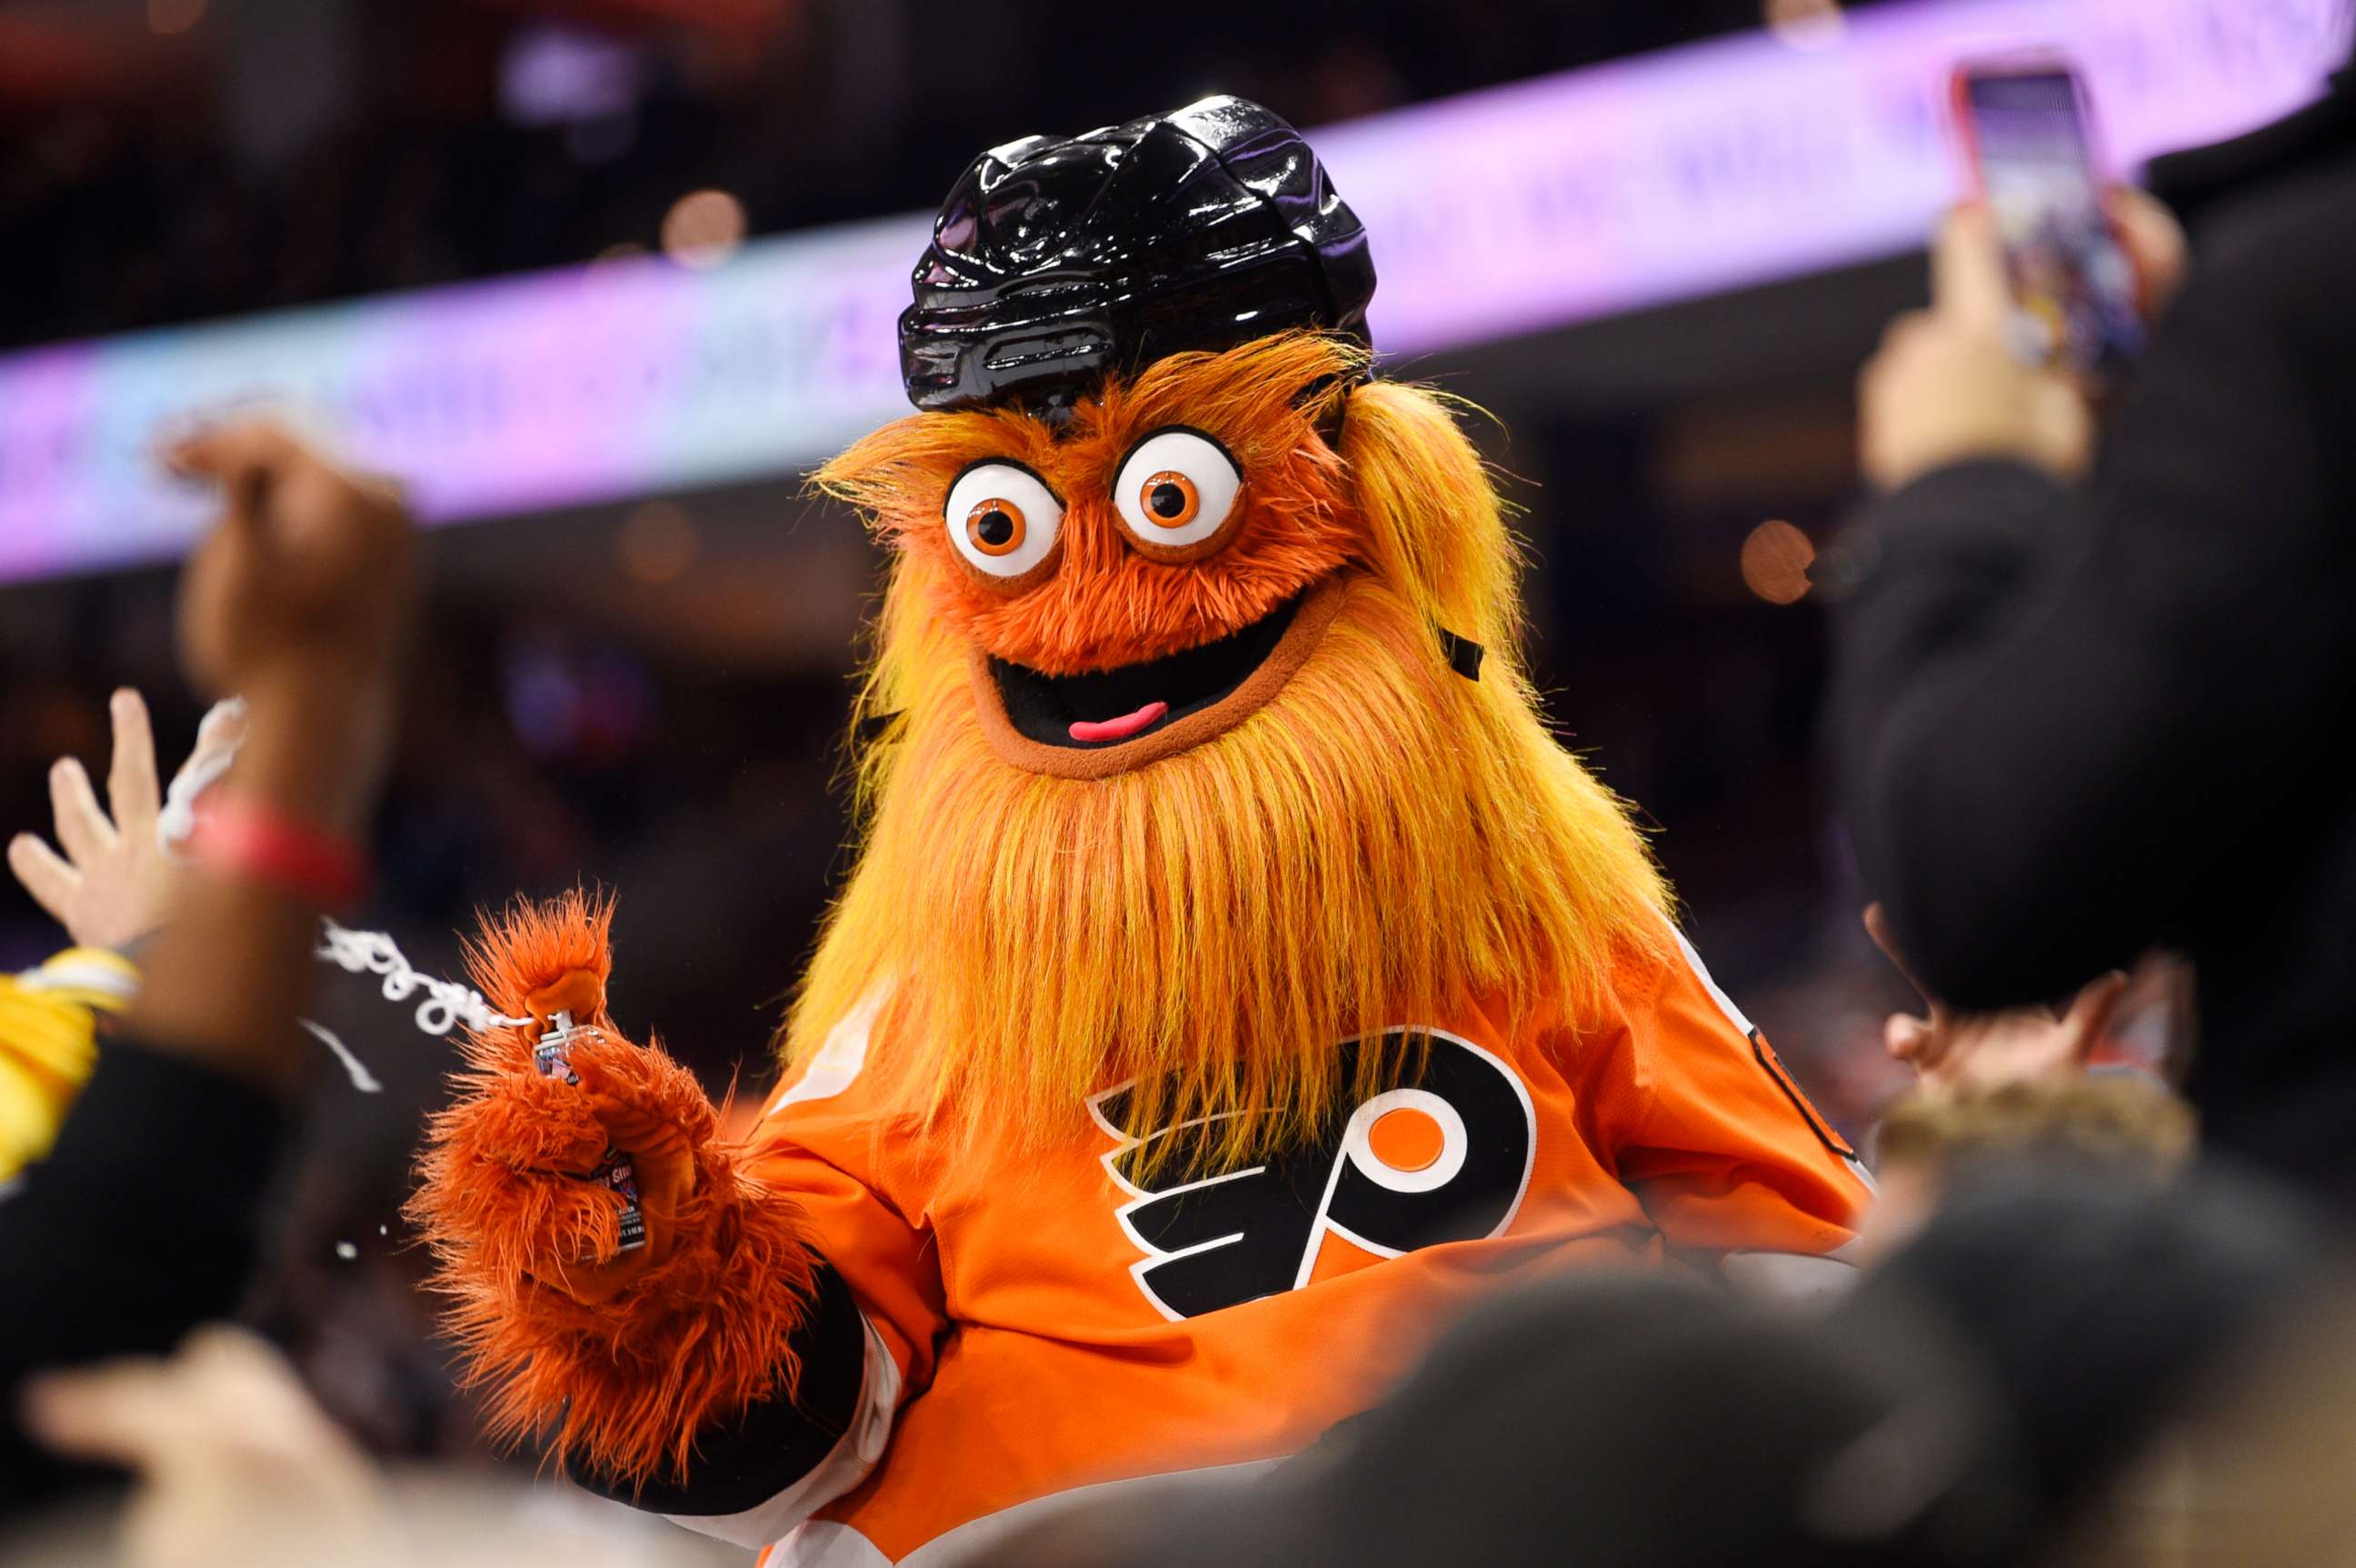 PHOTO: In this Monday, Jan. 13, 2020 file photo, the Philadelphia Flyers' mascot, Gritty, performs during an NHL hockey game in Philadelphia. 